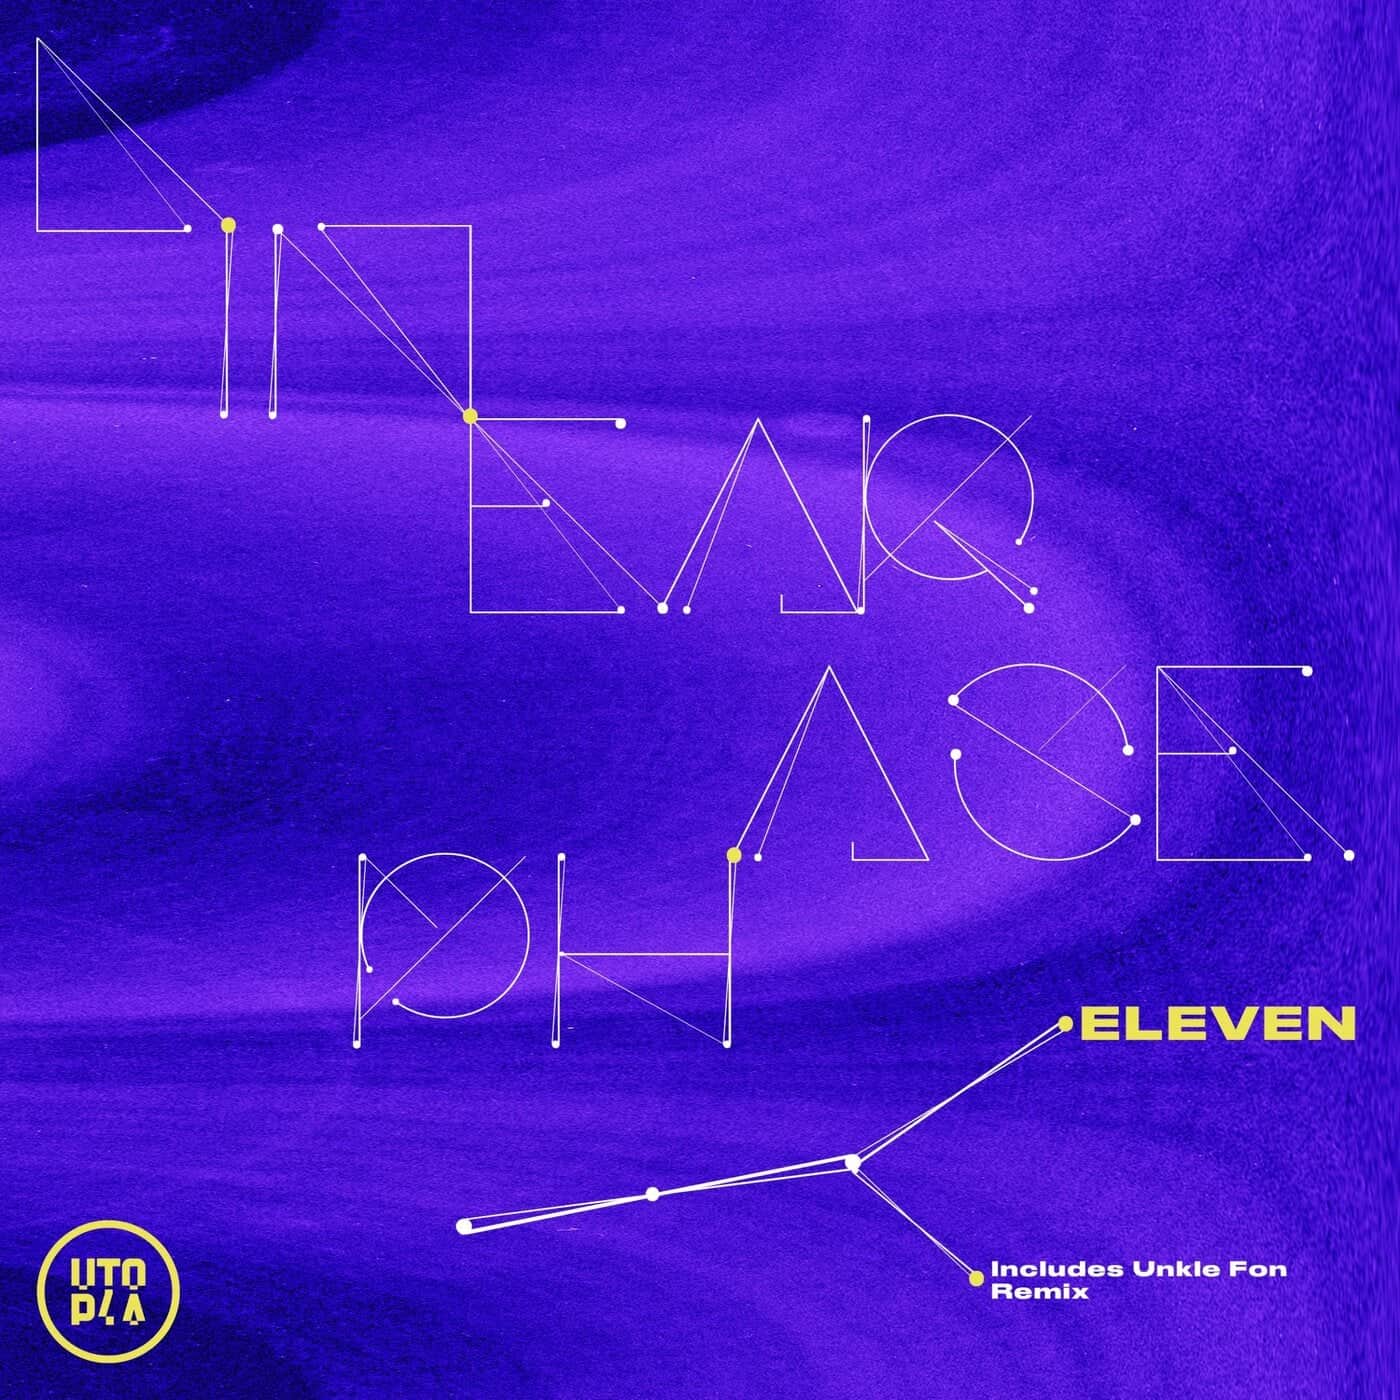 Download Linear Phase - Utopia Society: Eleven on Electrobuzz